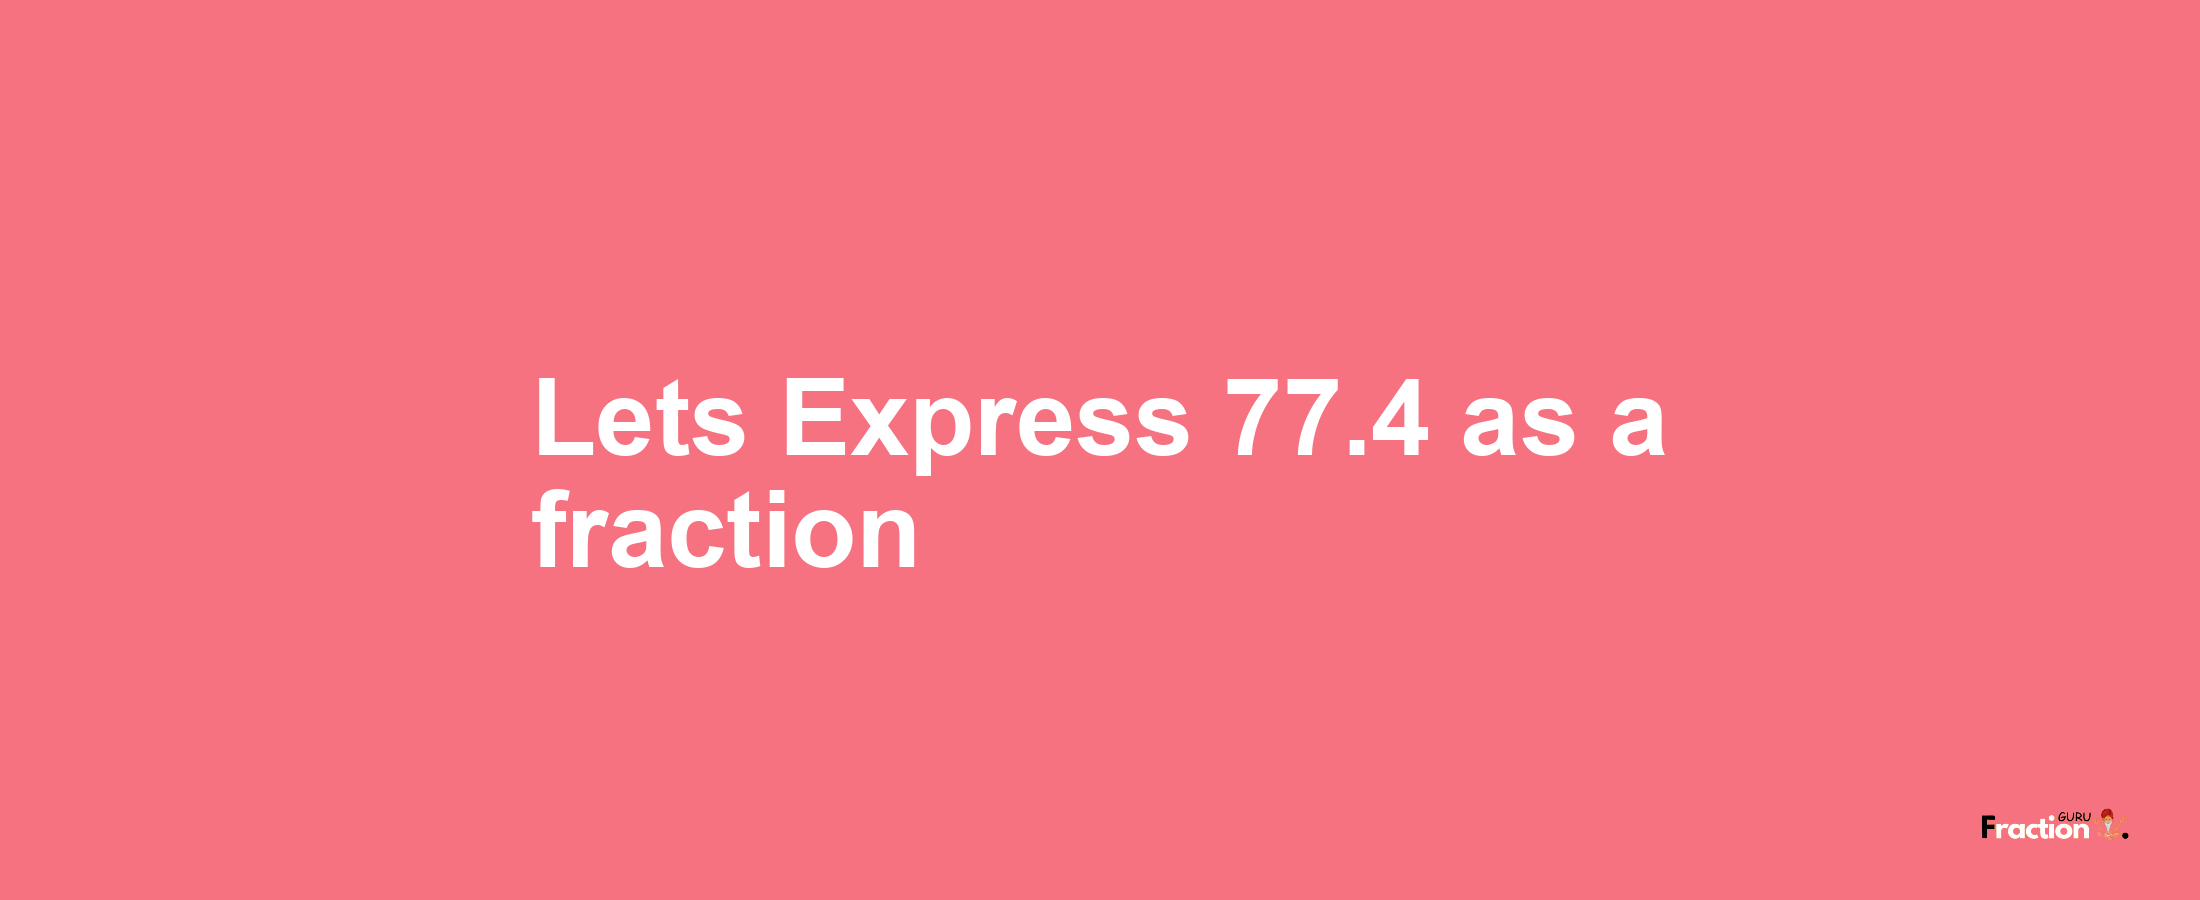 Lets Express 77.4 as afraction